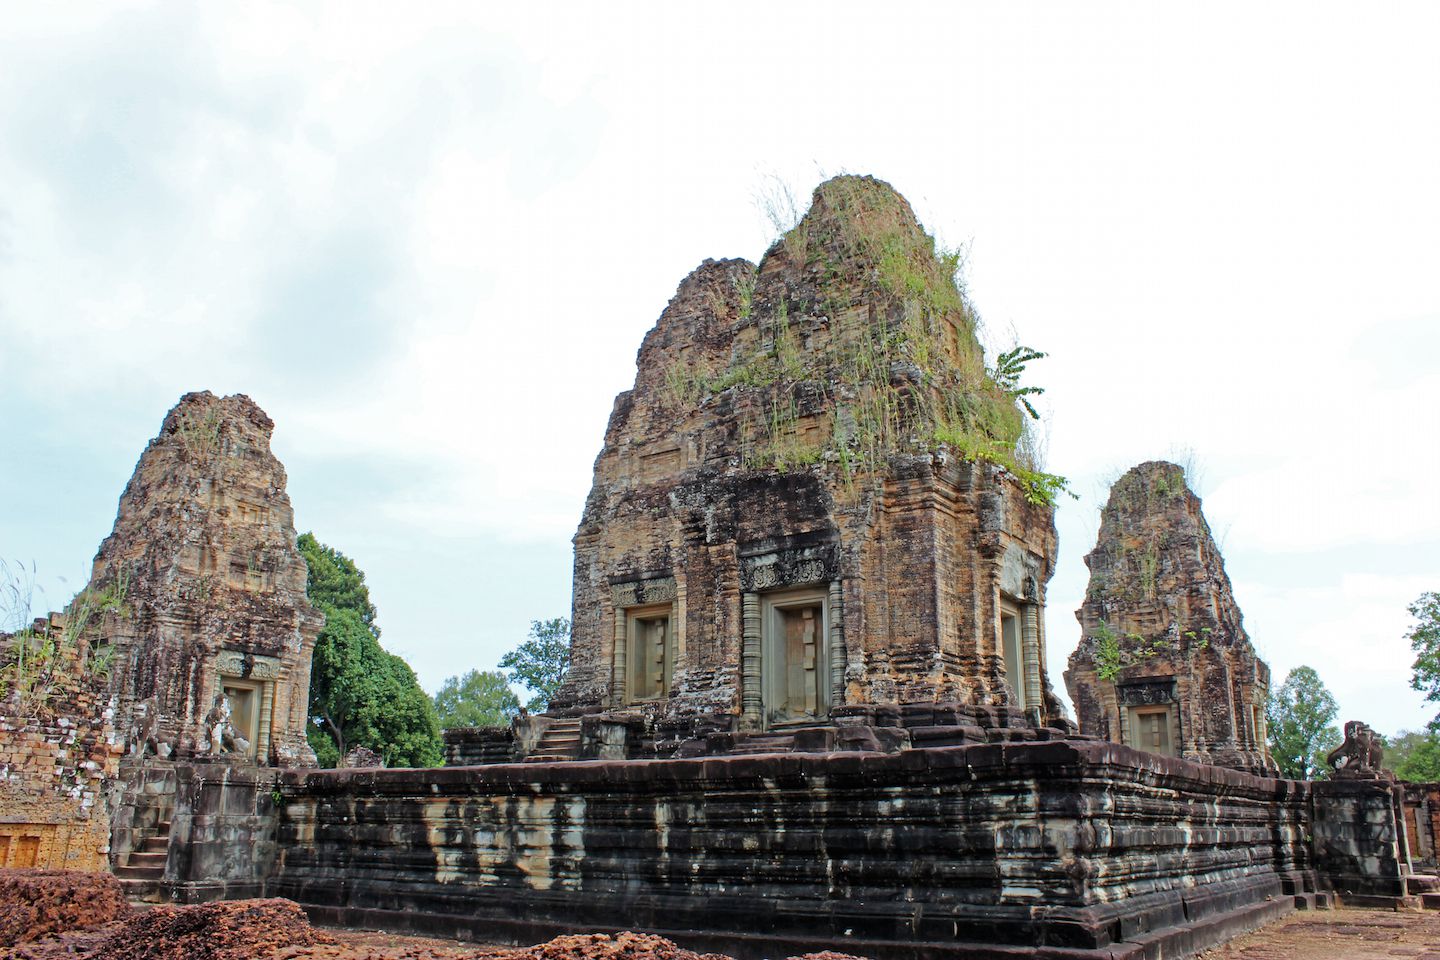 Top level of the East Mebon